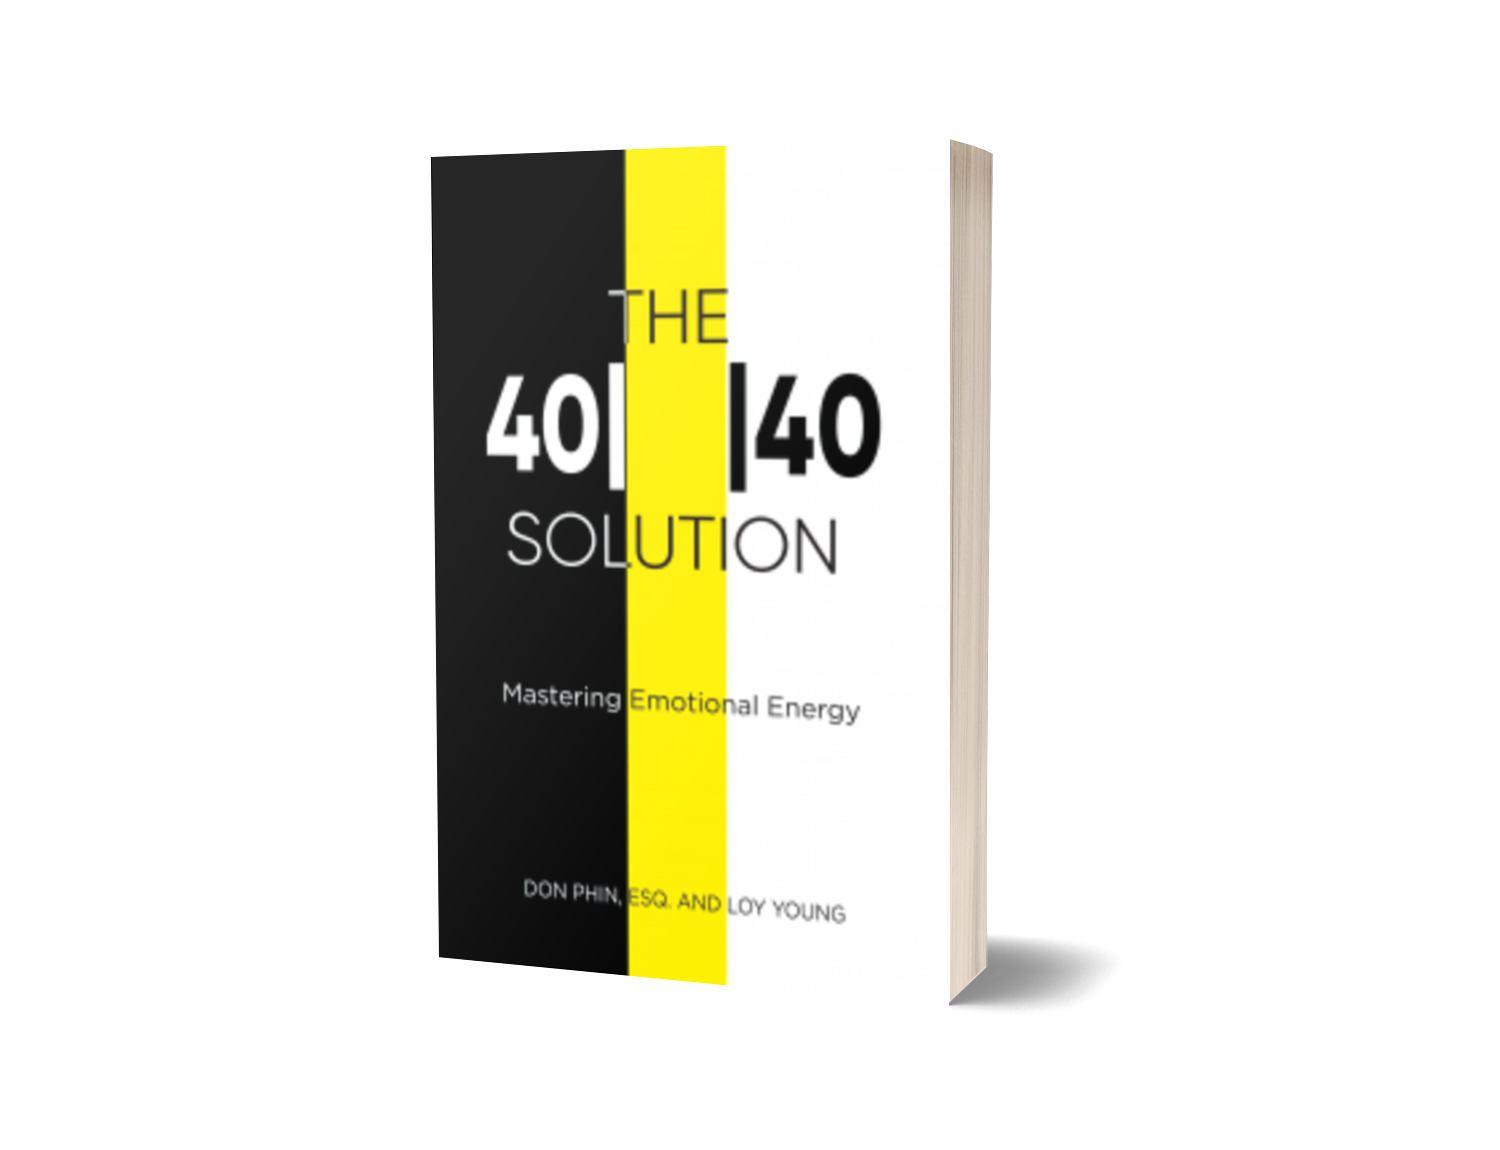 40 40 solution book